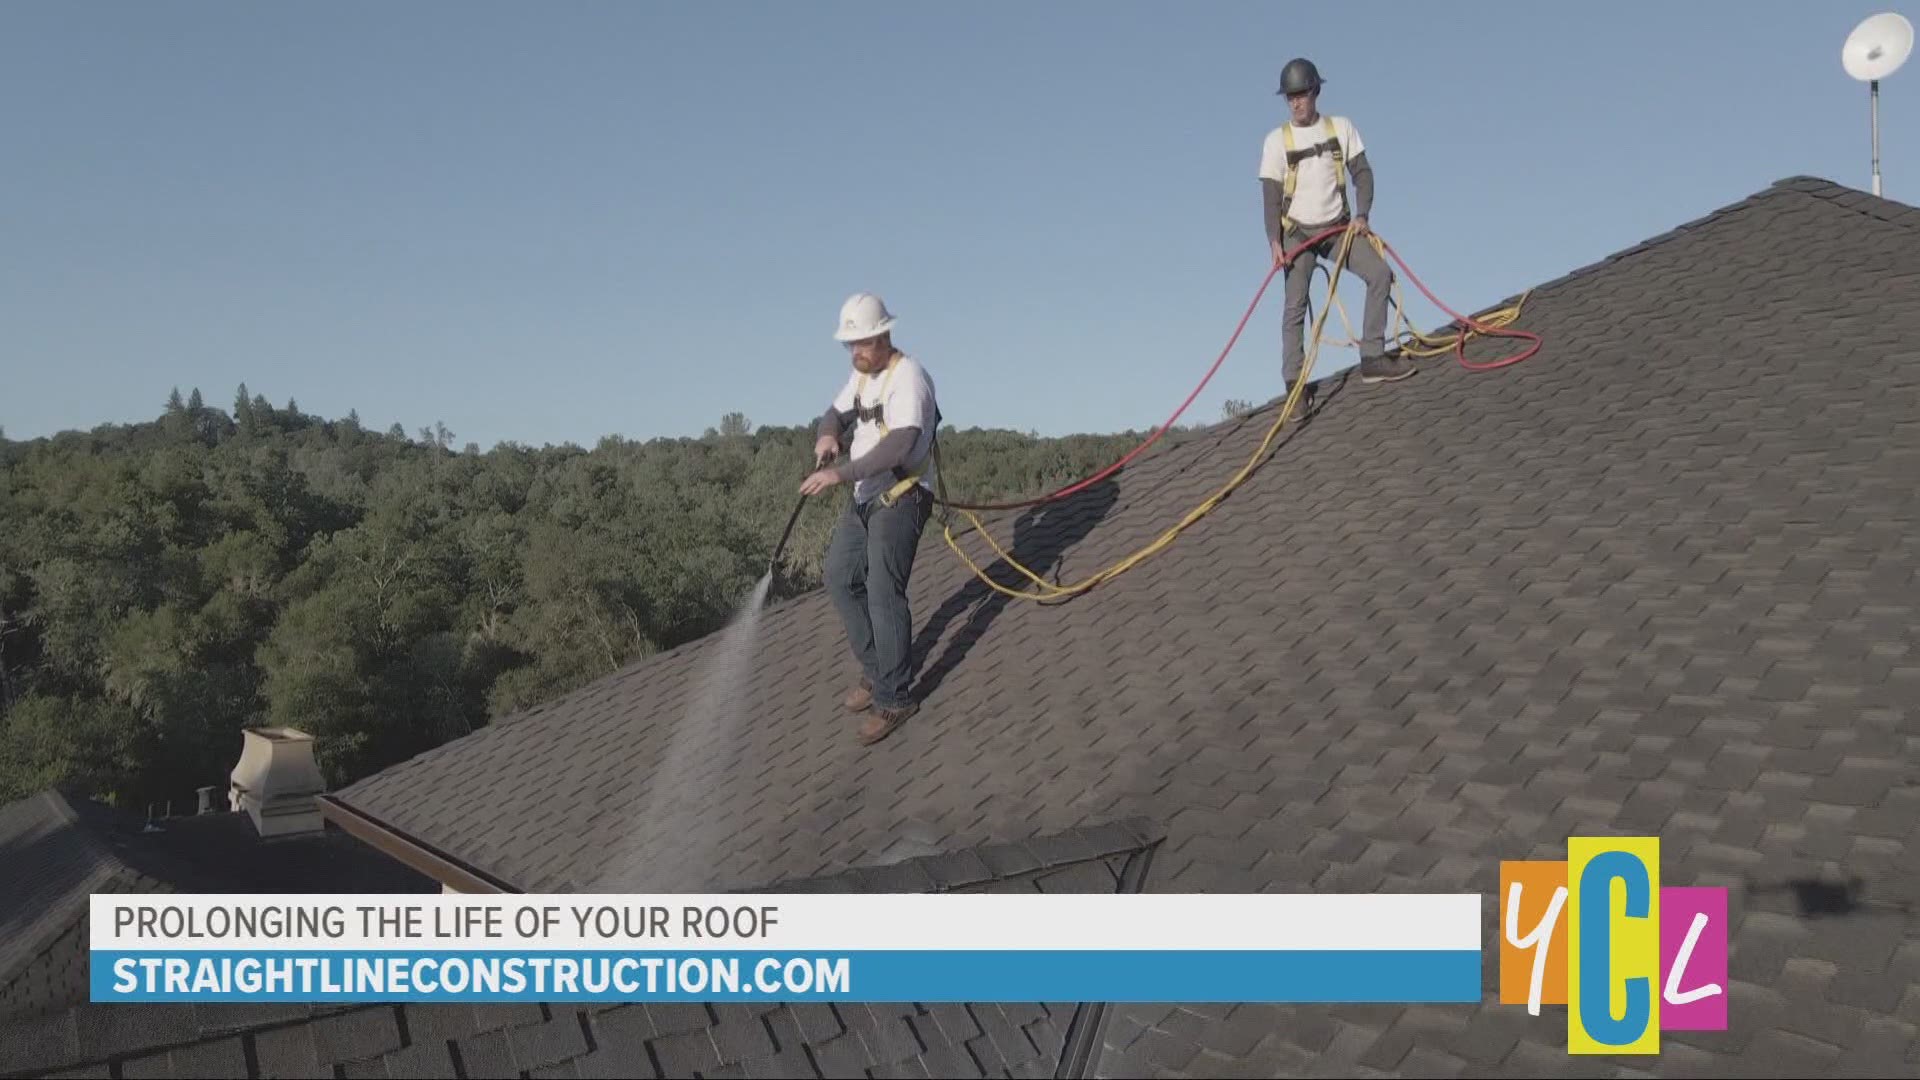 Expert advice that can help extend the life of your home's roof with their money-saving service. This segment was paid for by Straight Line Construction.